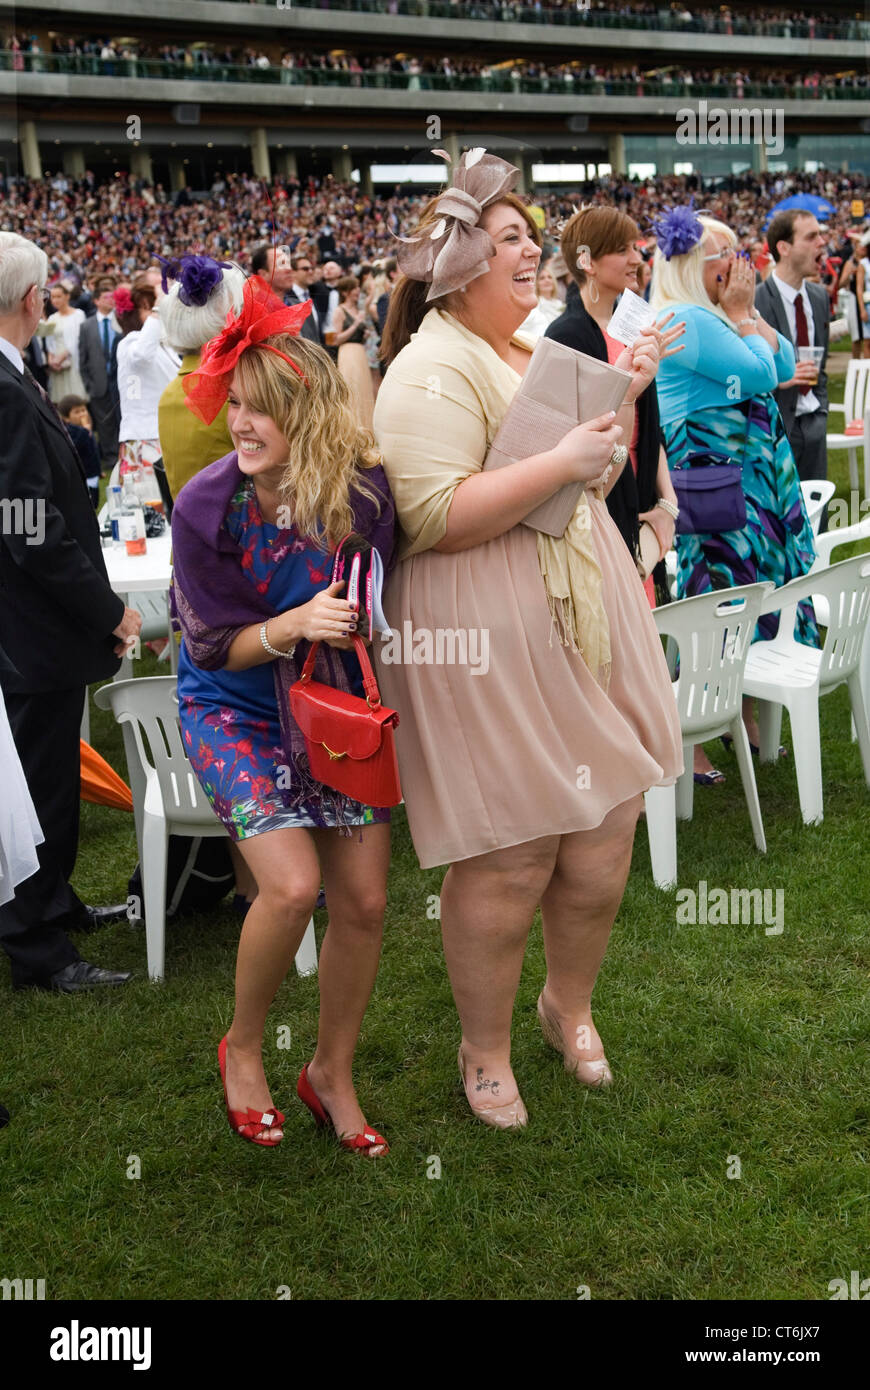 Fat thin women UK contrasting body shape and size Royal Ascot horse racing Berkshire. Two young women, win winning happy, their horse has just won. 2012 2010s HOMER SYKES Stock Photo